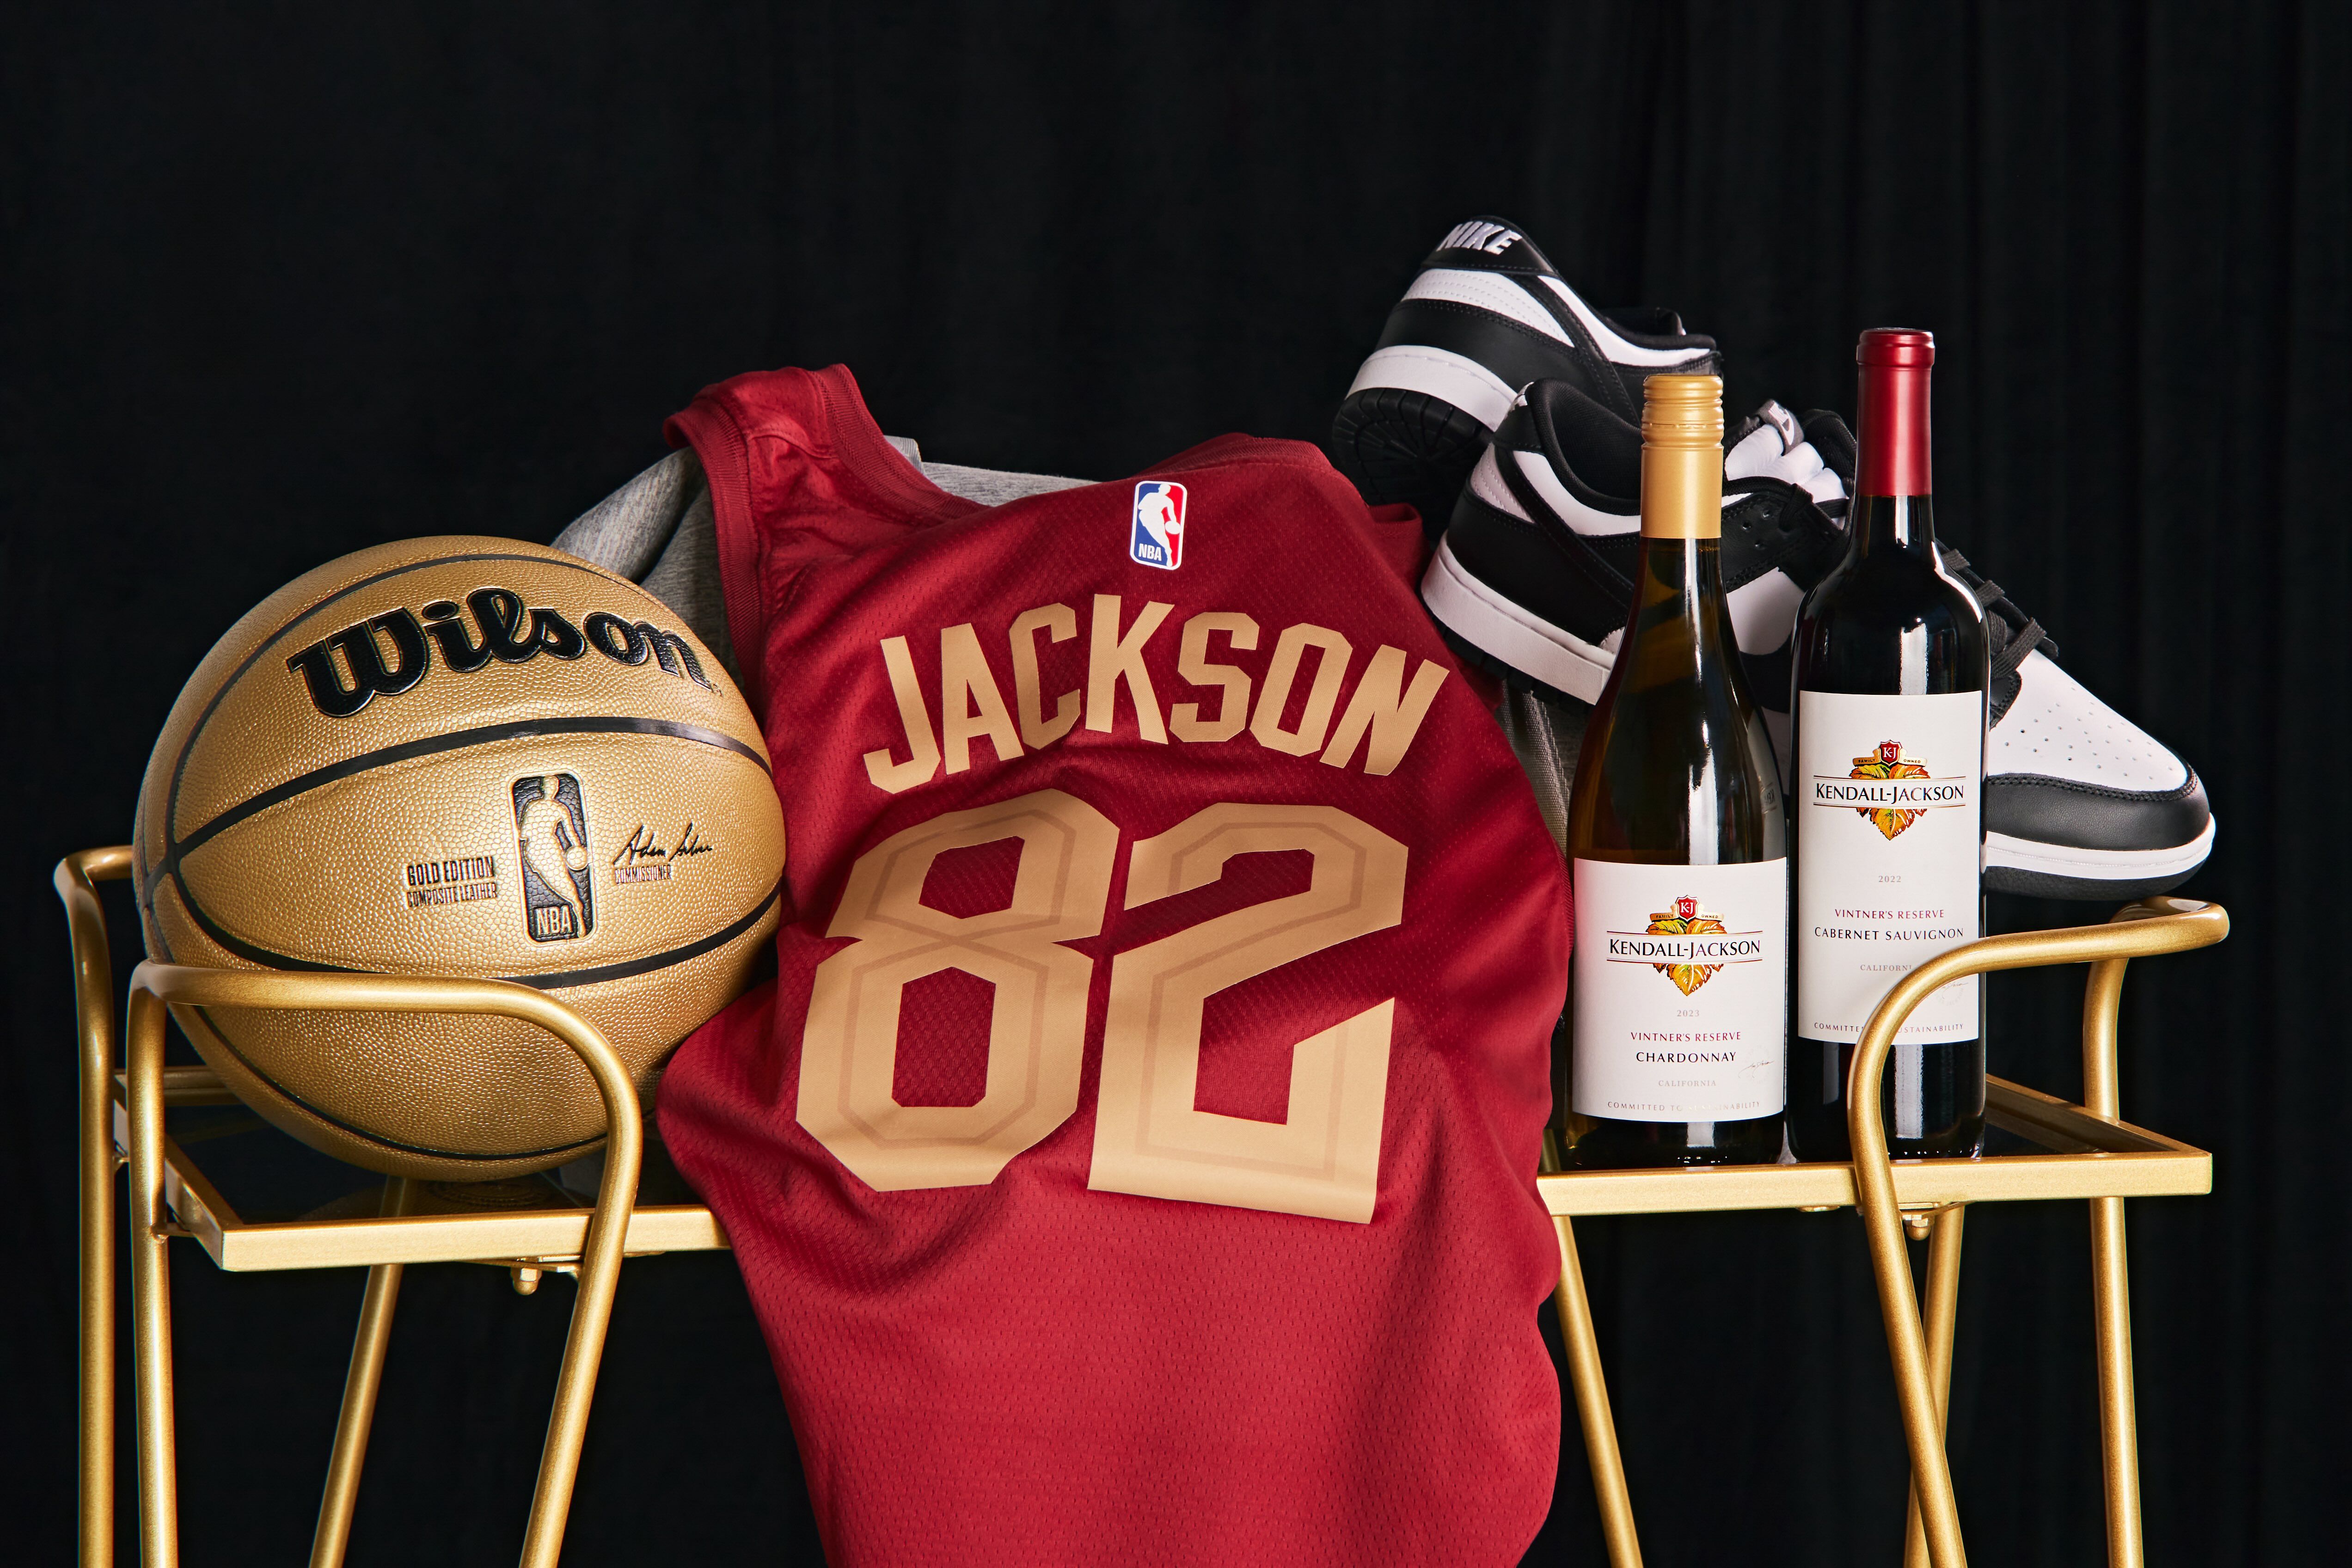 Kendall-Jackson: The Official Wine Partner of the NBA